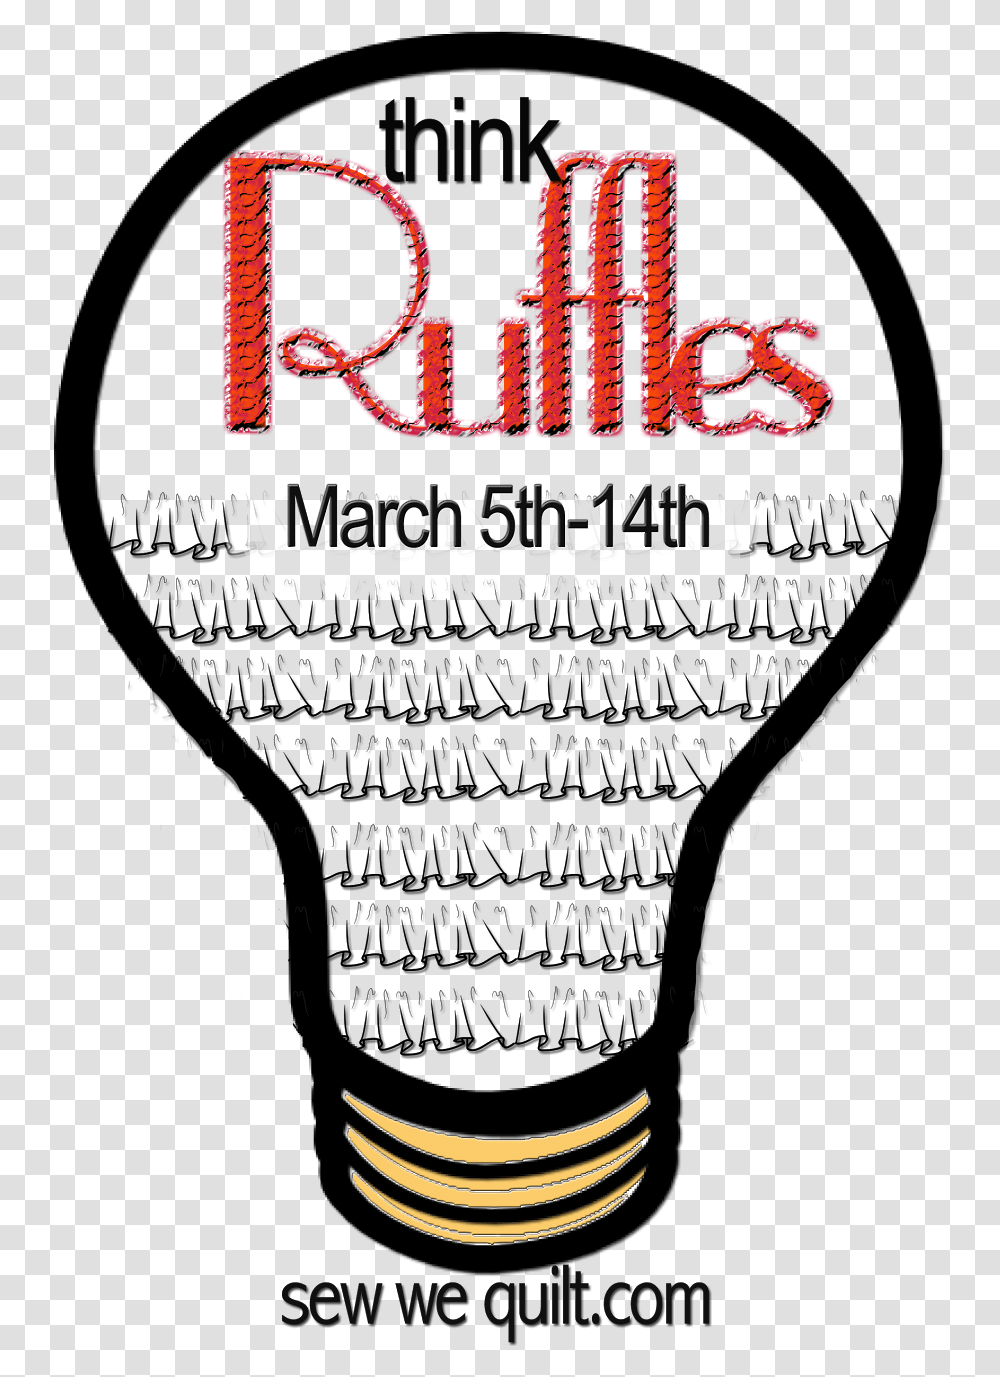 Download Amy Has The Schedule Up Light Bulb Clip Art Light Bulb Clip Art, Lightbulb Transparent Png